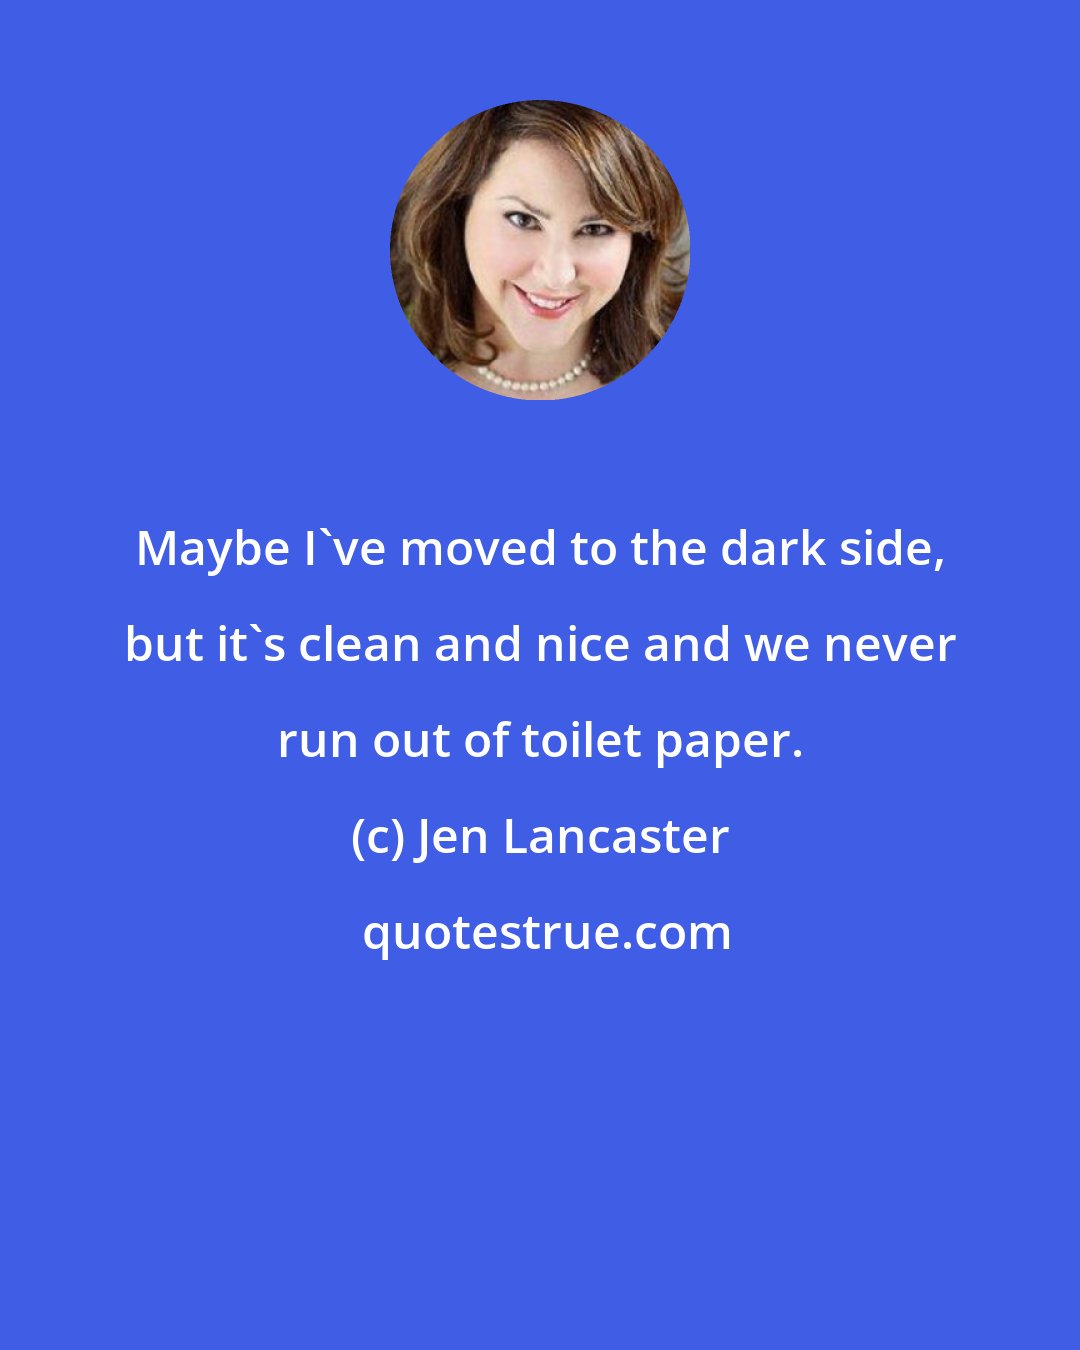 Jen Lancaster: Maybe I've moved to the dark side, but it's clean and nice and we never run out of toilet paper.